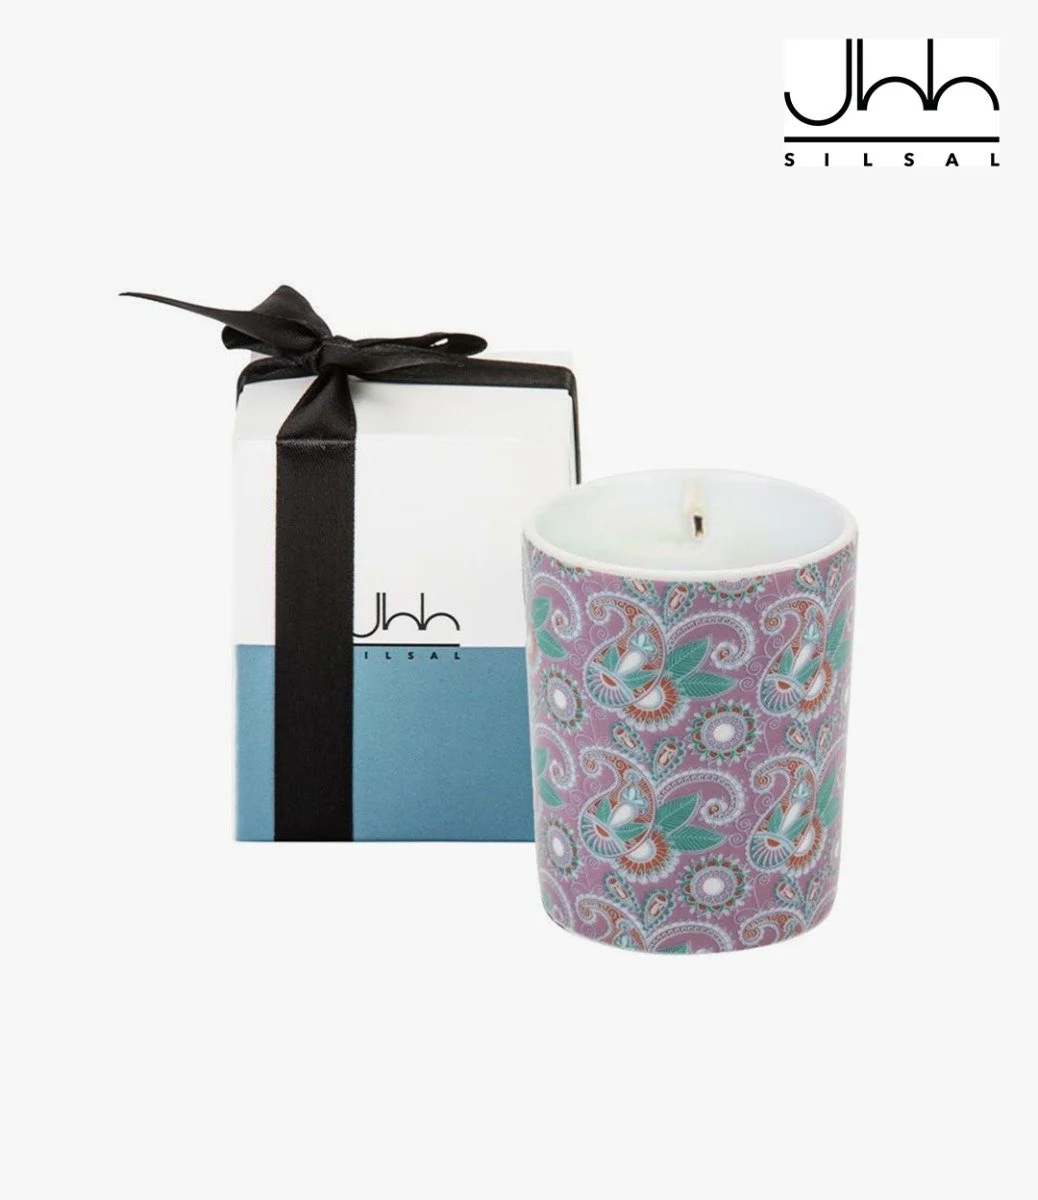 The Mumbai Candle - 60g By Silsal*